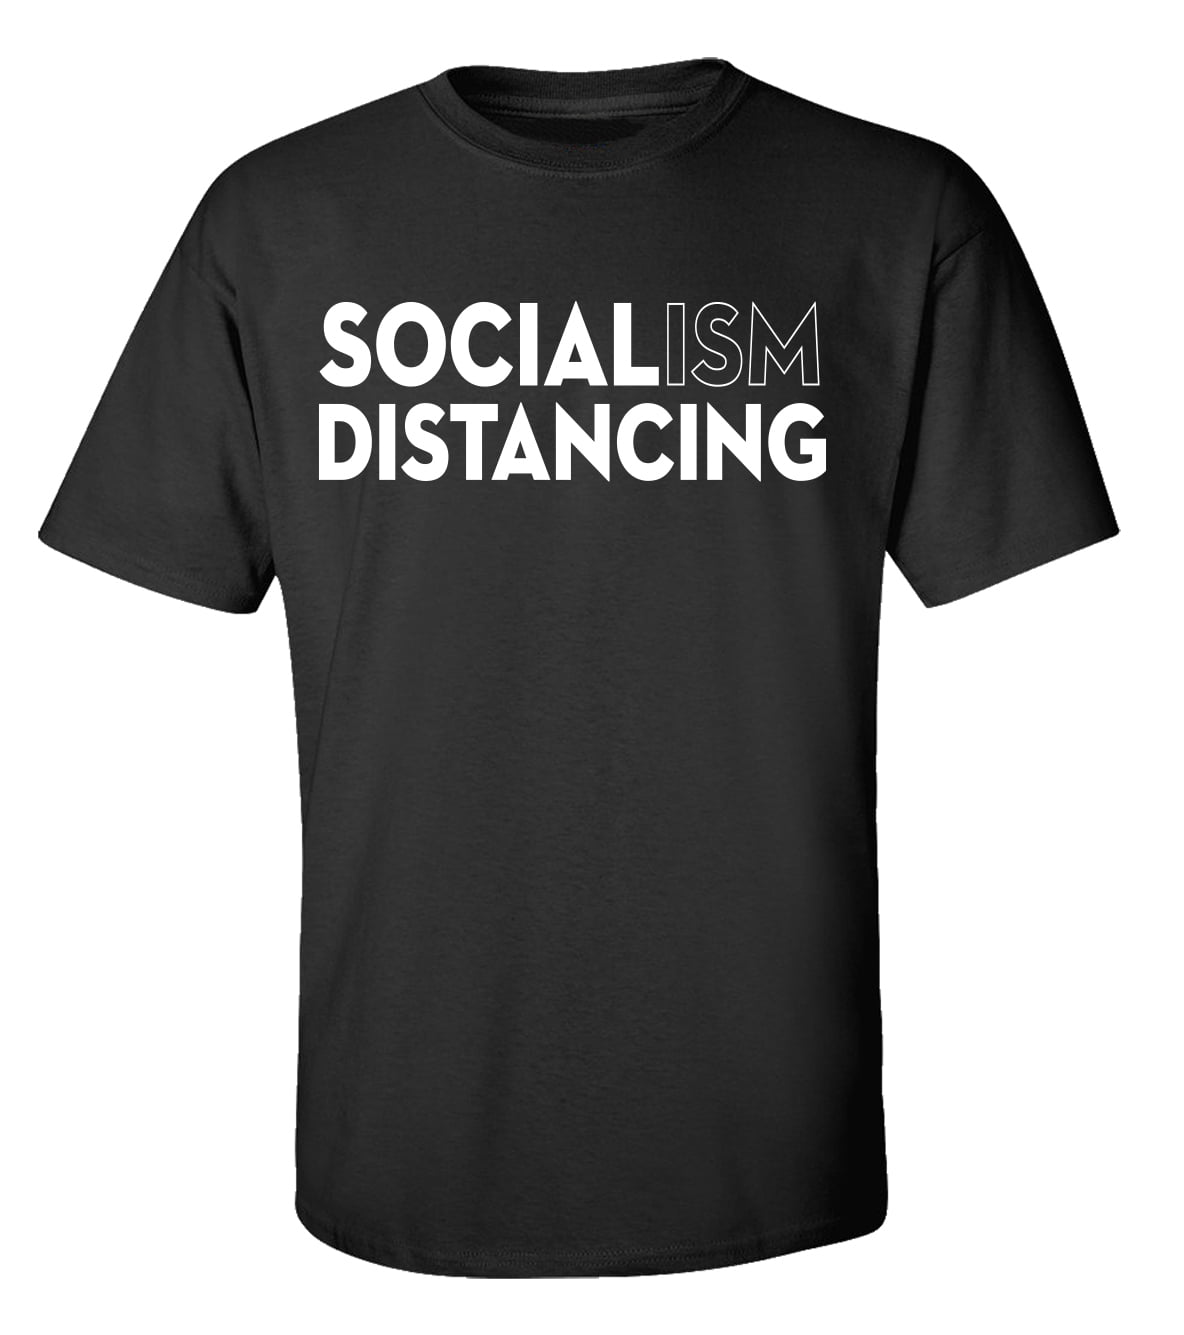 Patriotic Shirts Socialism Distancing I Keep Your Bad Ideas Away Short Sleeve Tee Conservative Women's T-Shirts